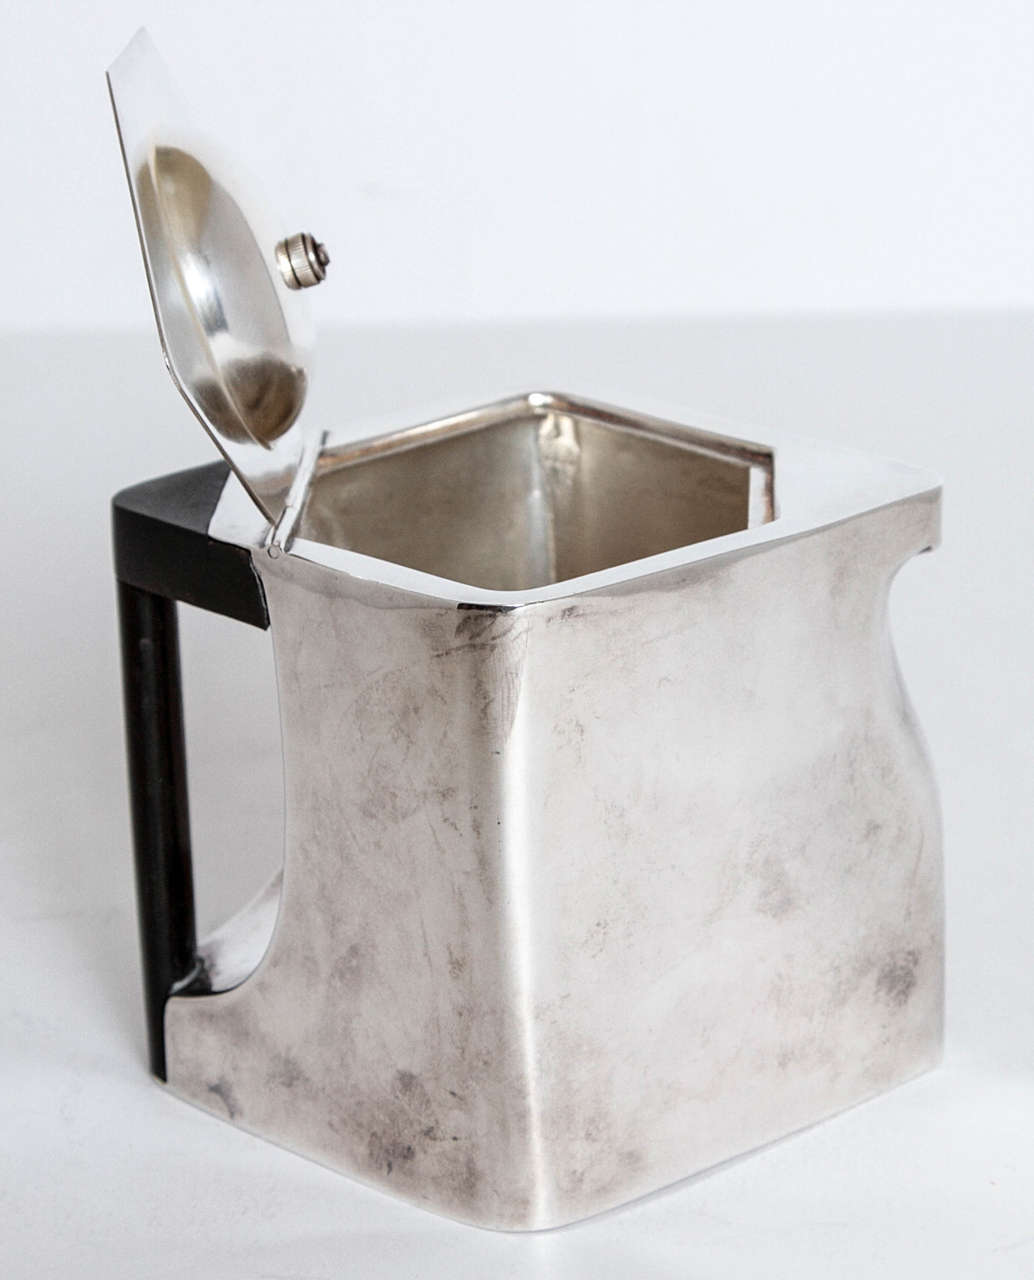 Early 20th Century Uncommon English silver plate vintage CUBE teapot by Robert Johnson for N & D